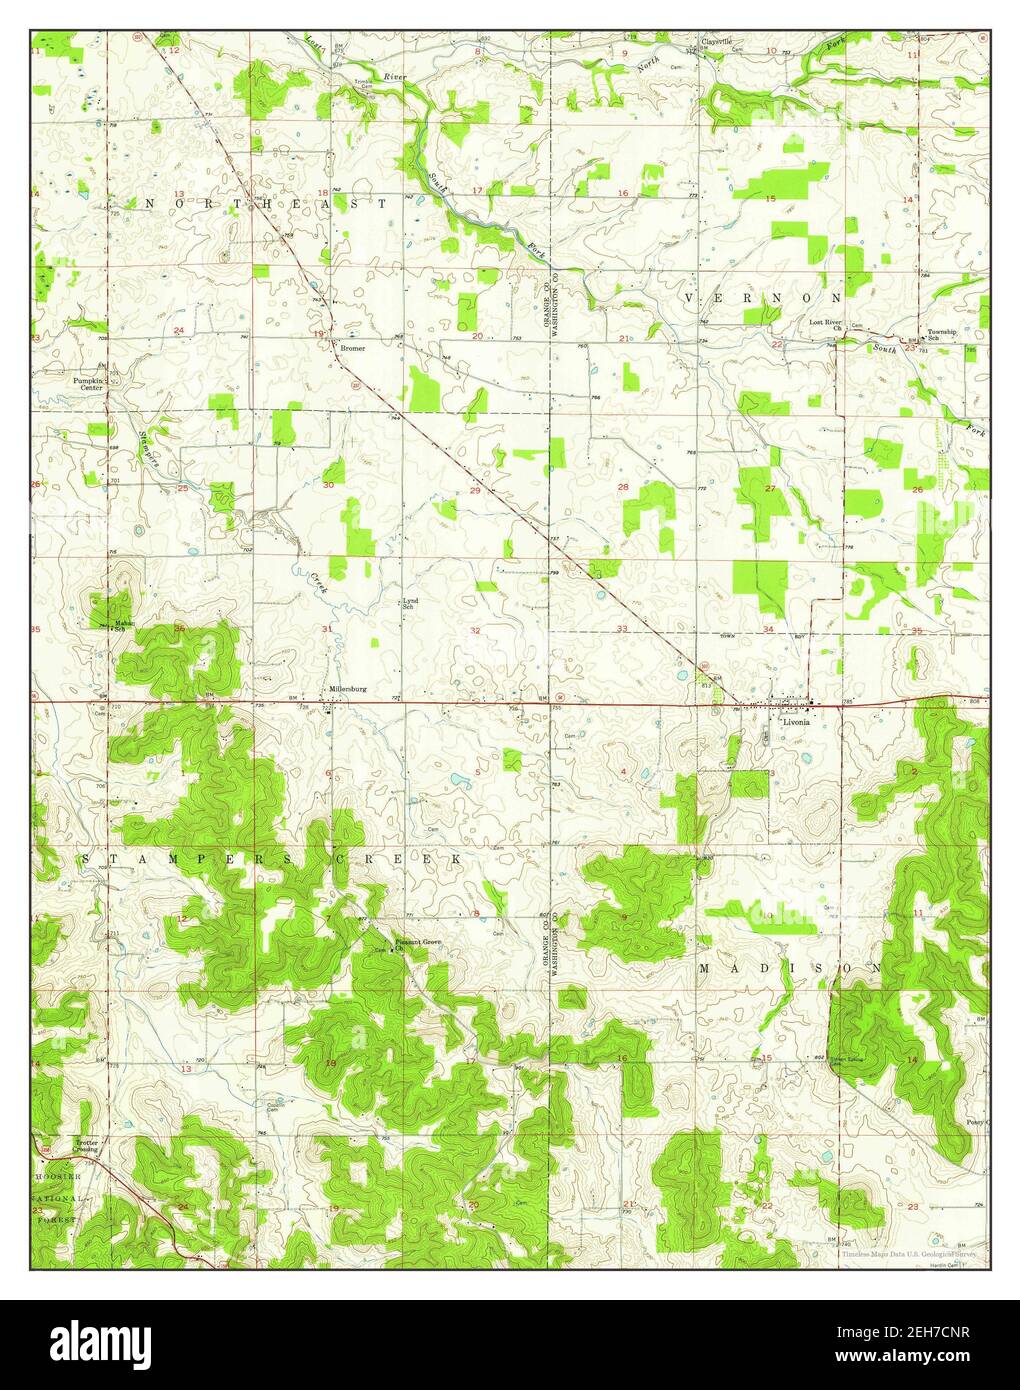 Livonia, Indiana, map 1957, 1:24000, United States of America by Timeless Maps, data U.S. Geological Survey Stock Photo